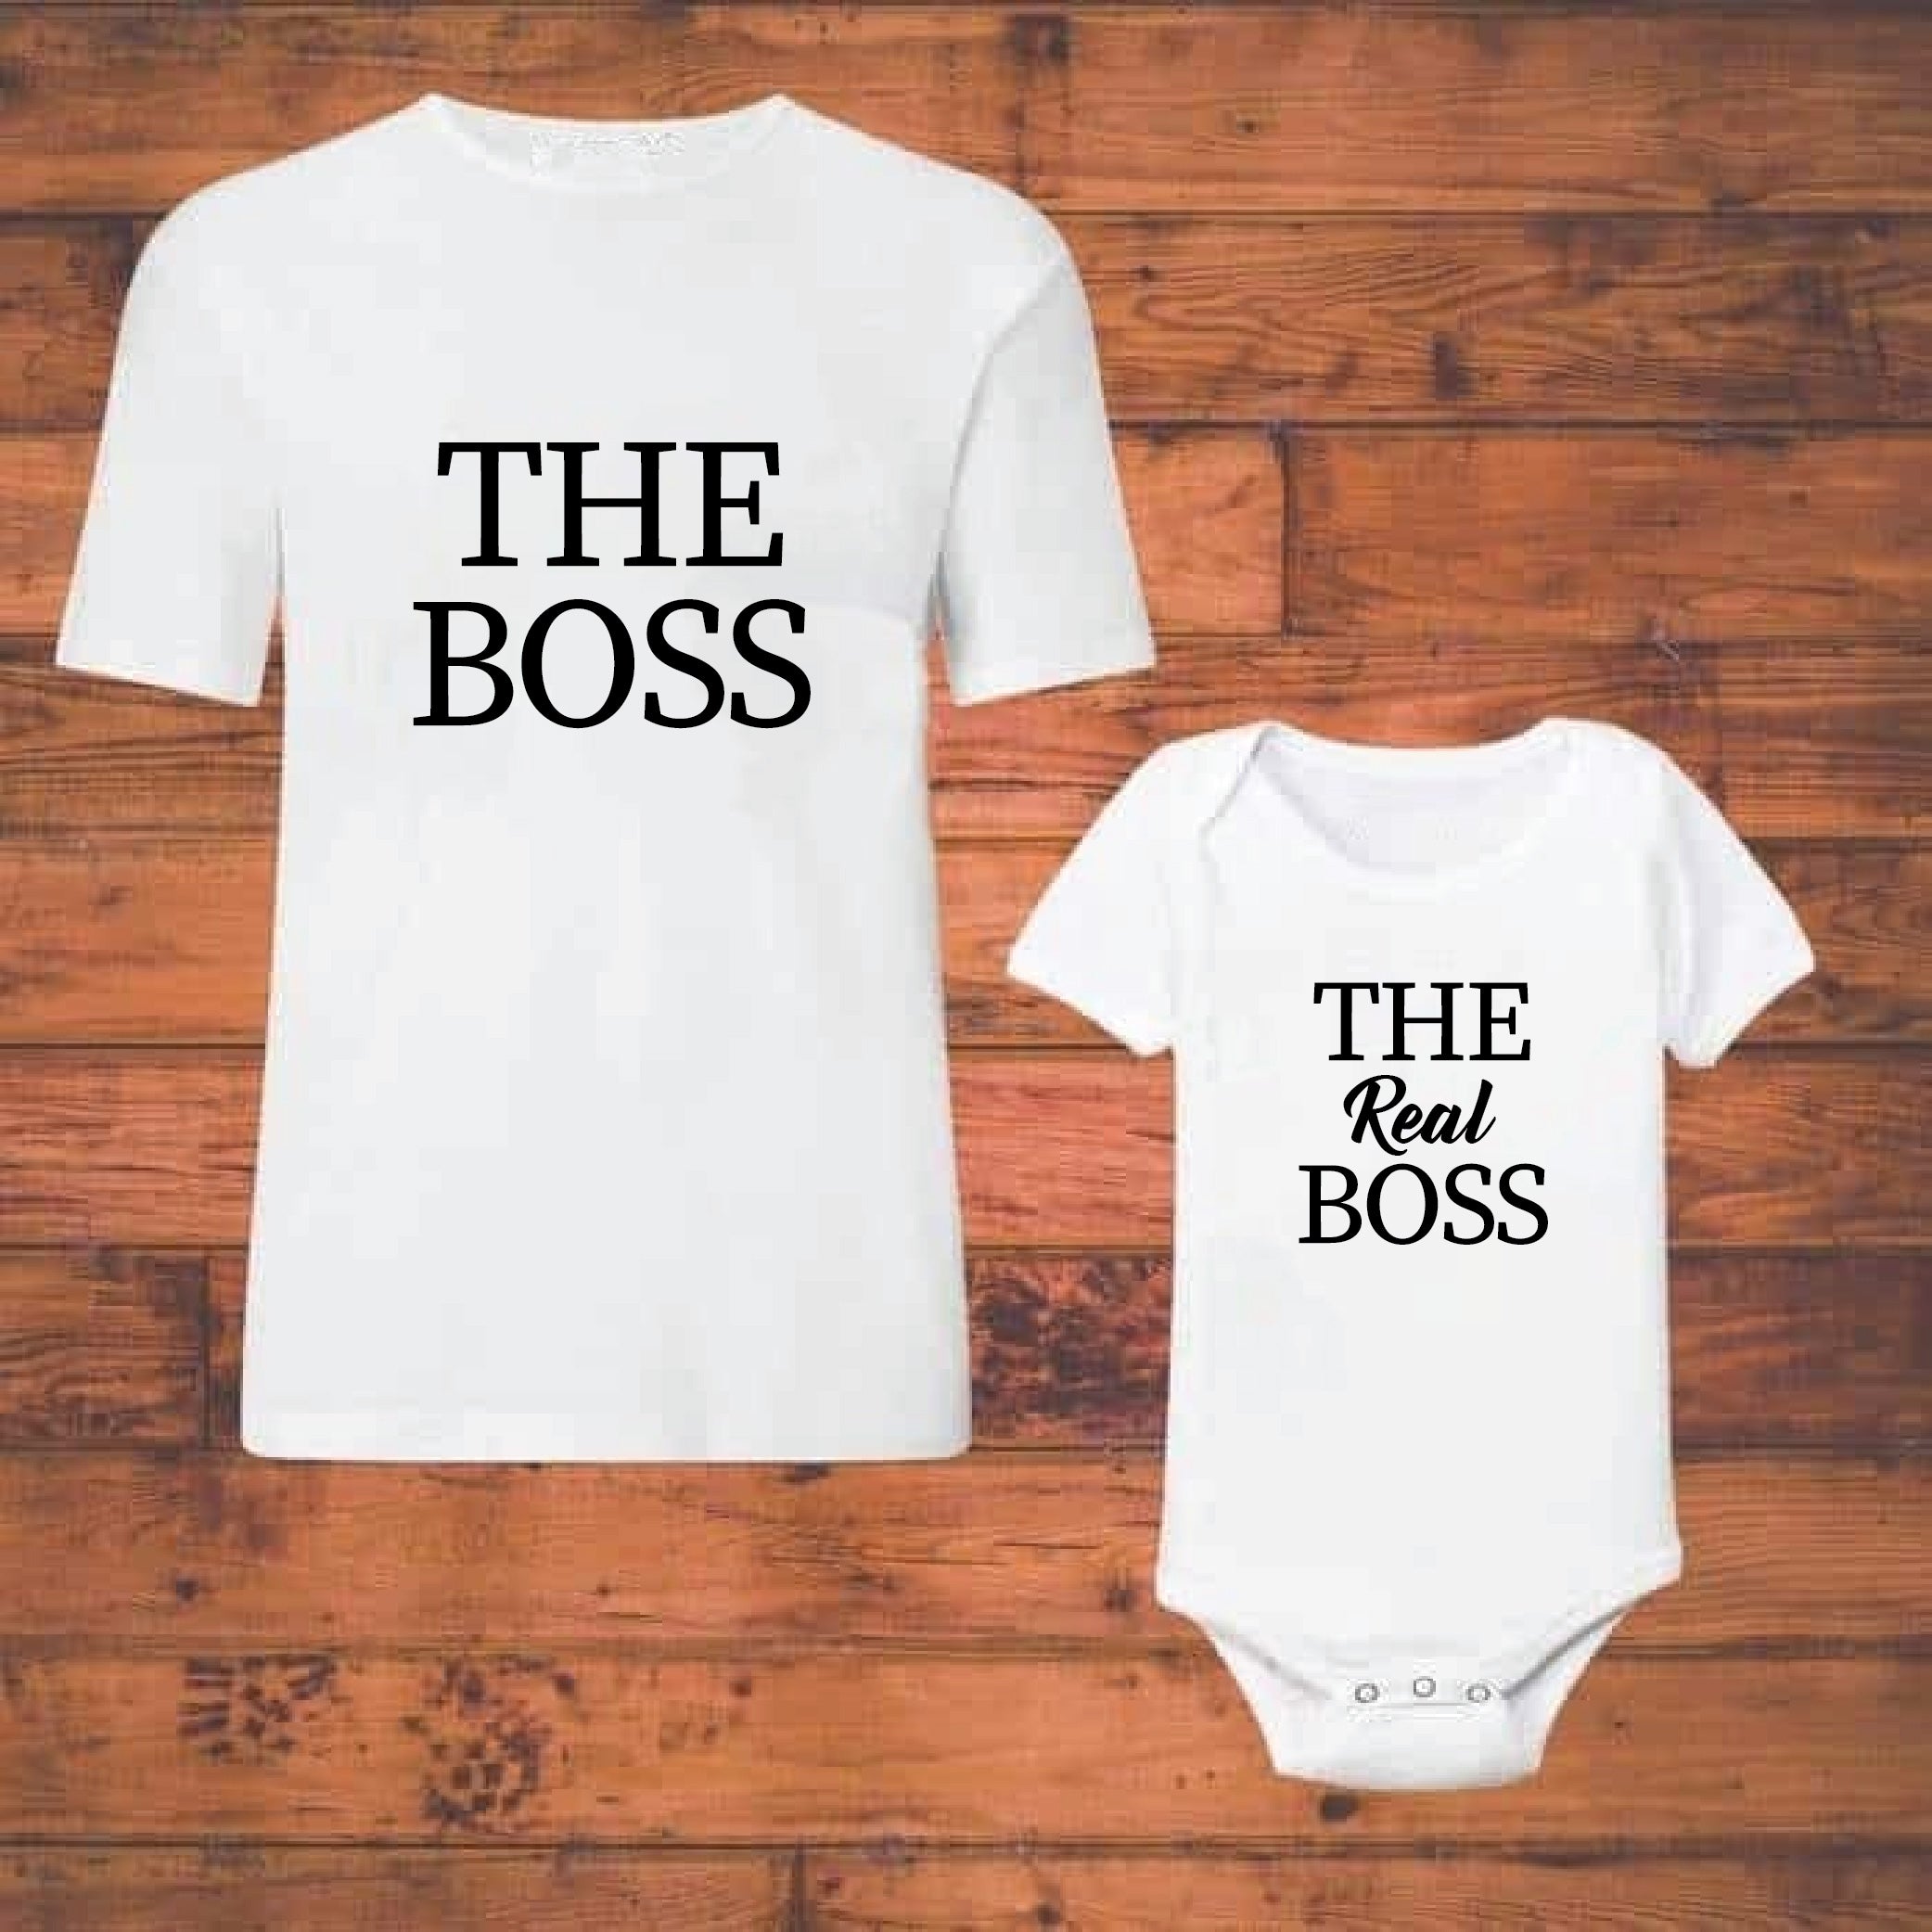 The Boss, The Real Boss - Combo of Adult Tshirt + Kid's Tshirt/Onesie